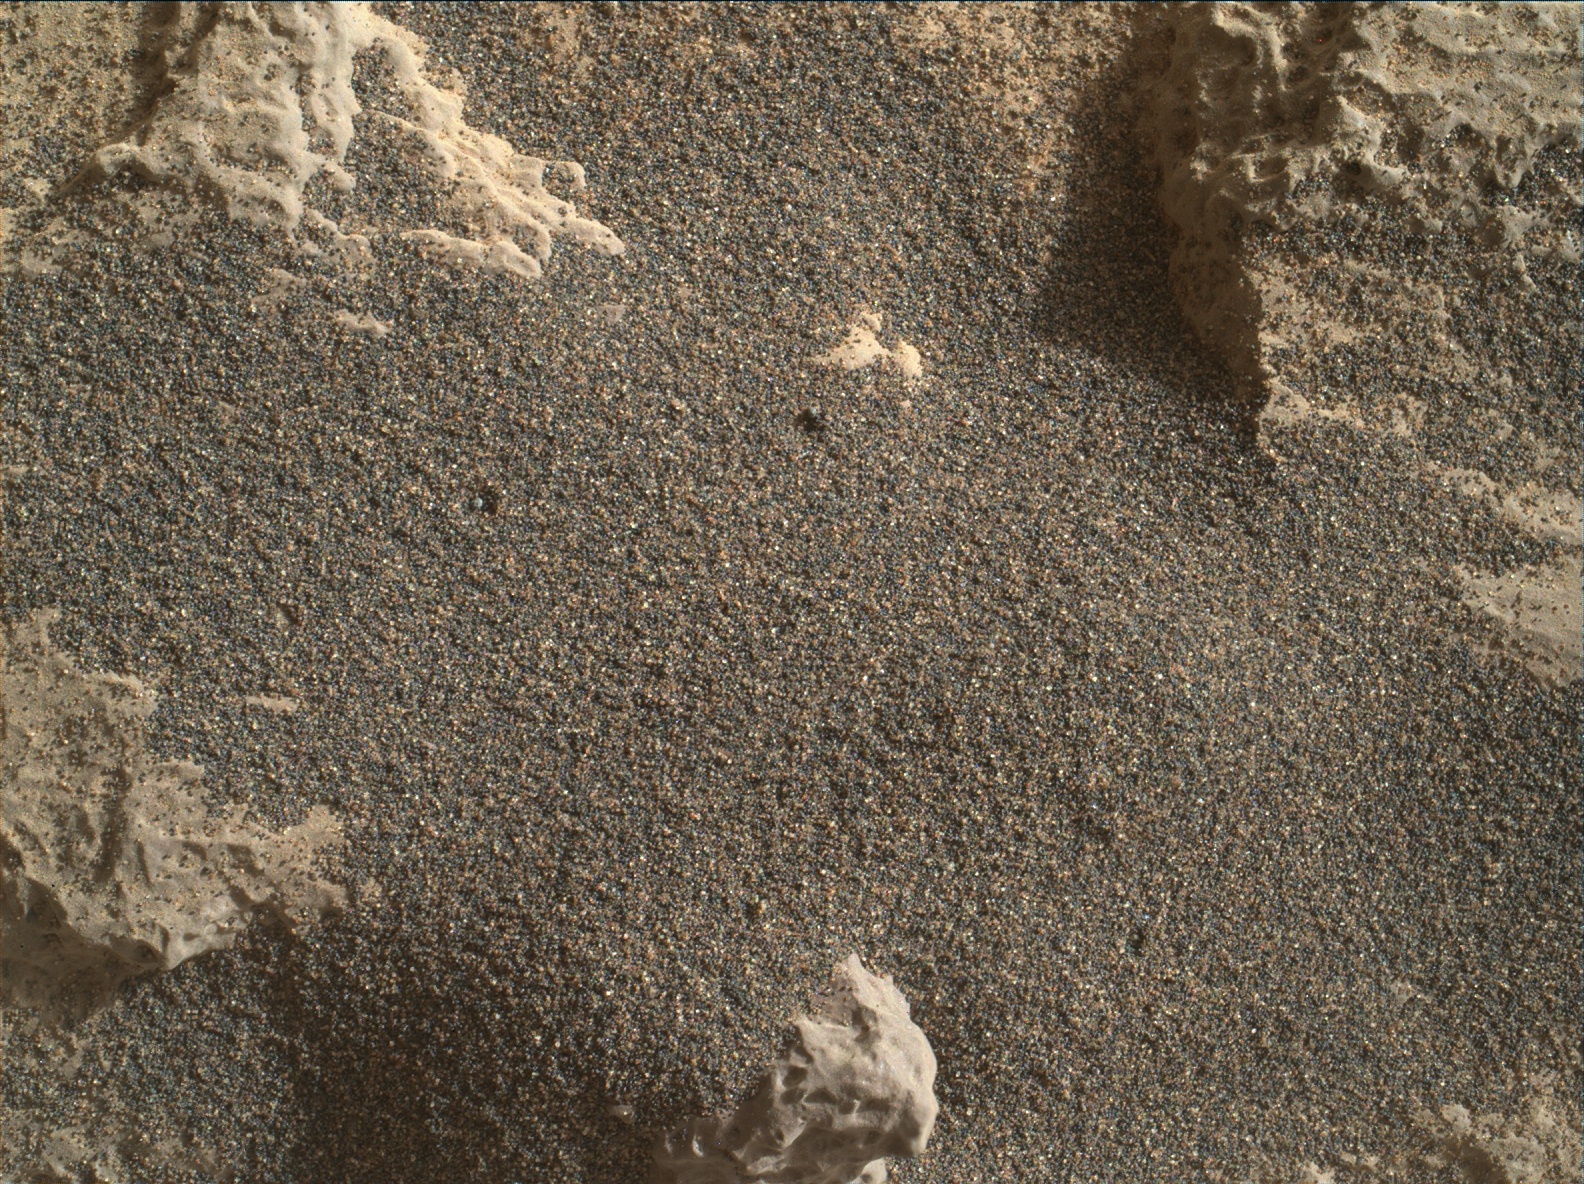 Nasa's Mars rover Curiosity acquired this image using its Mars Hand Lens Imager (MAHLI) on Sol 1253